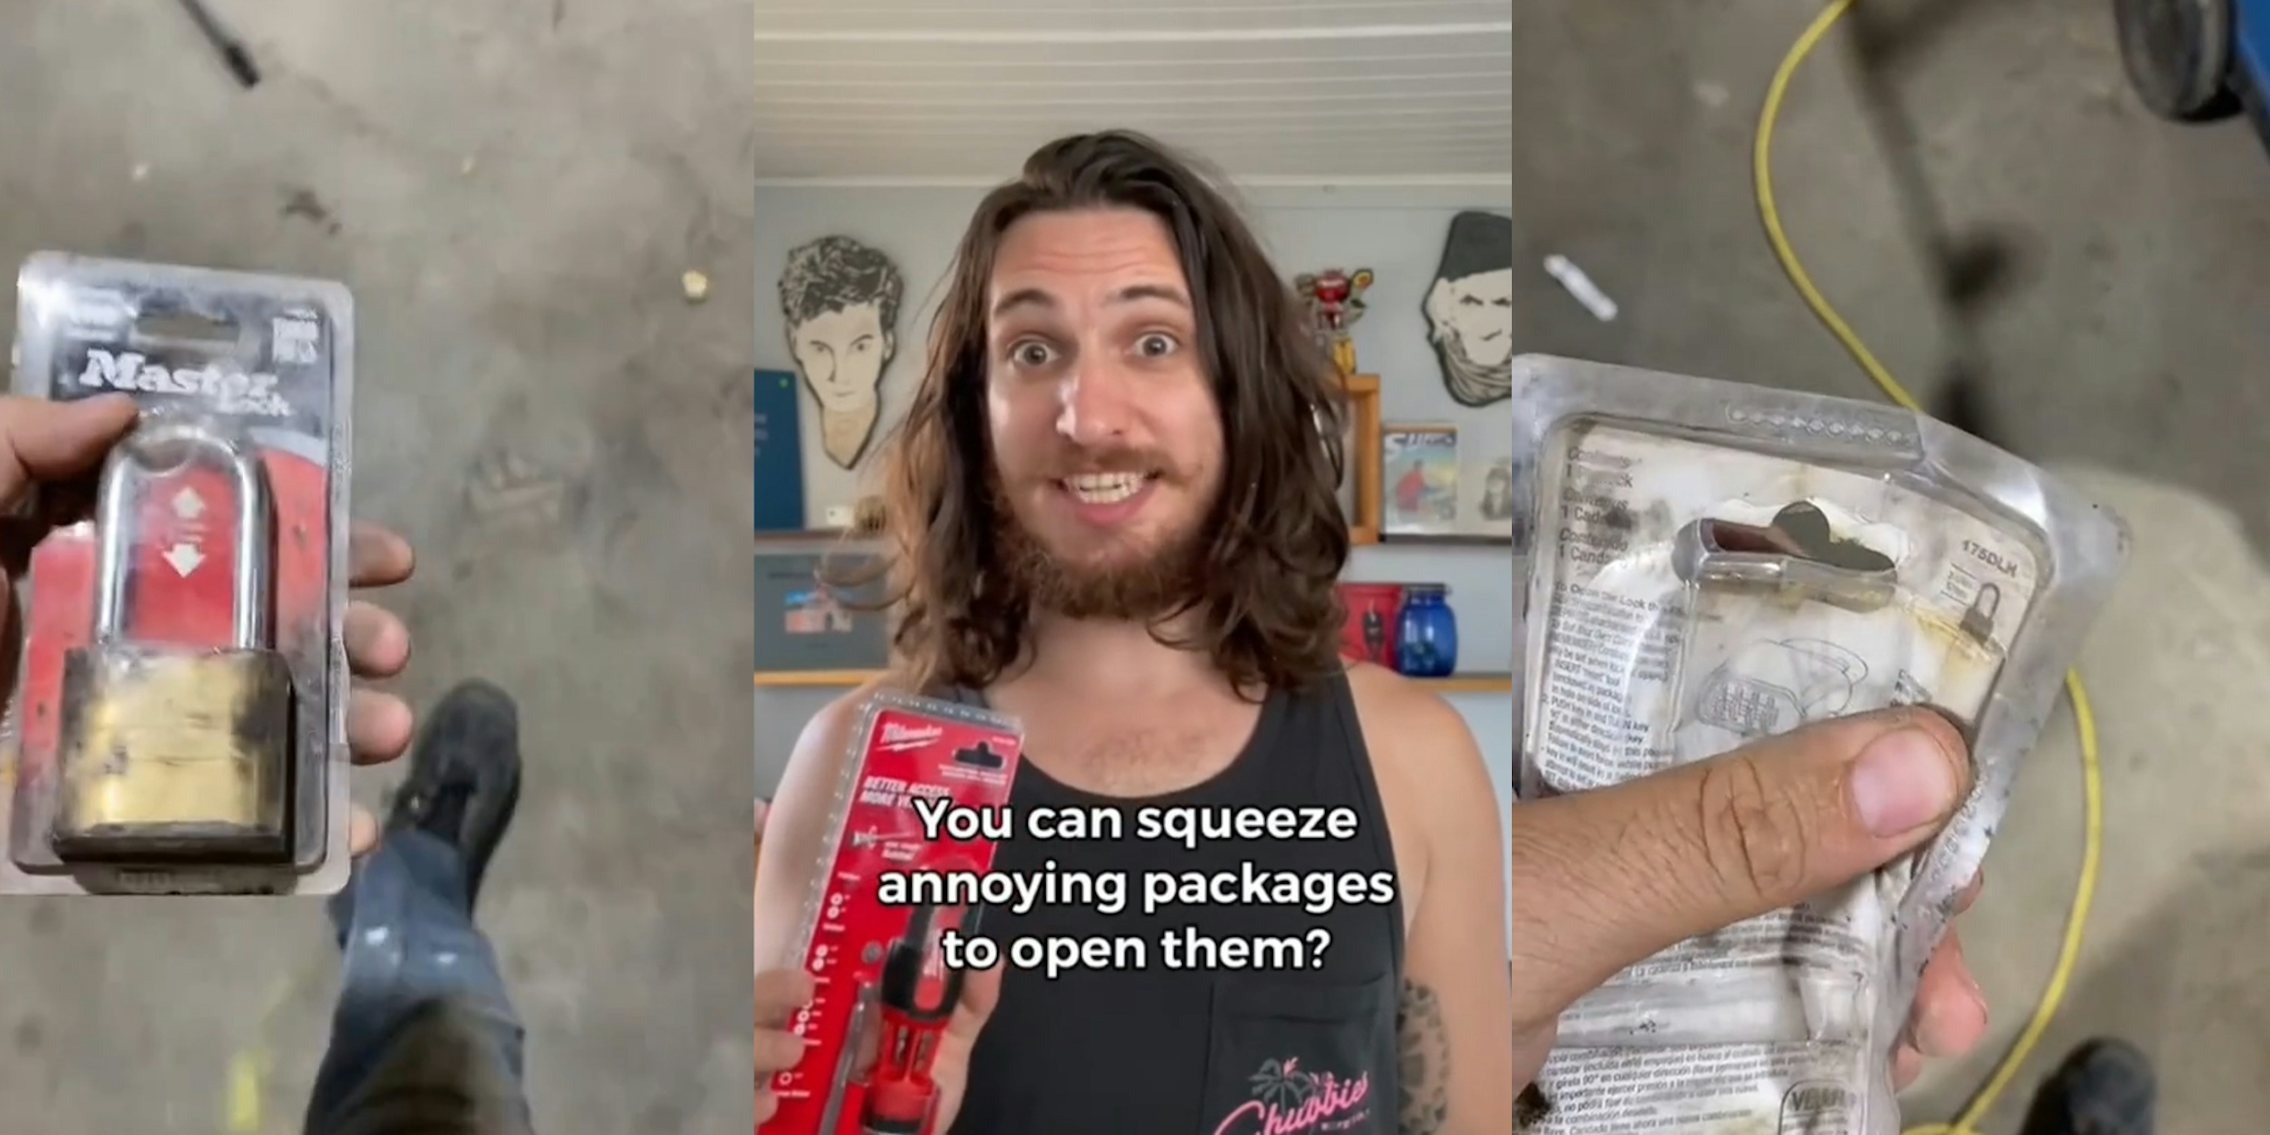 People are just finding out they can ‘squeeze annoying packages’ to open them